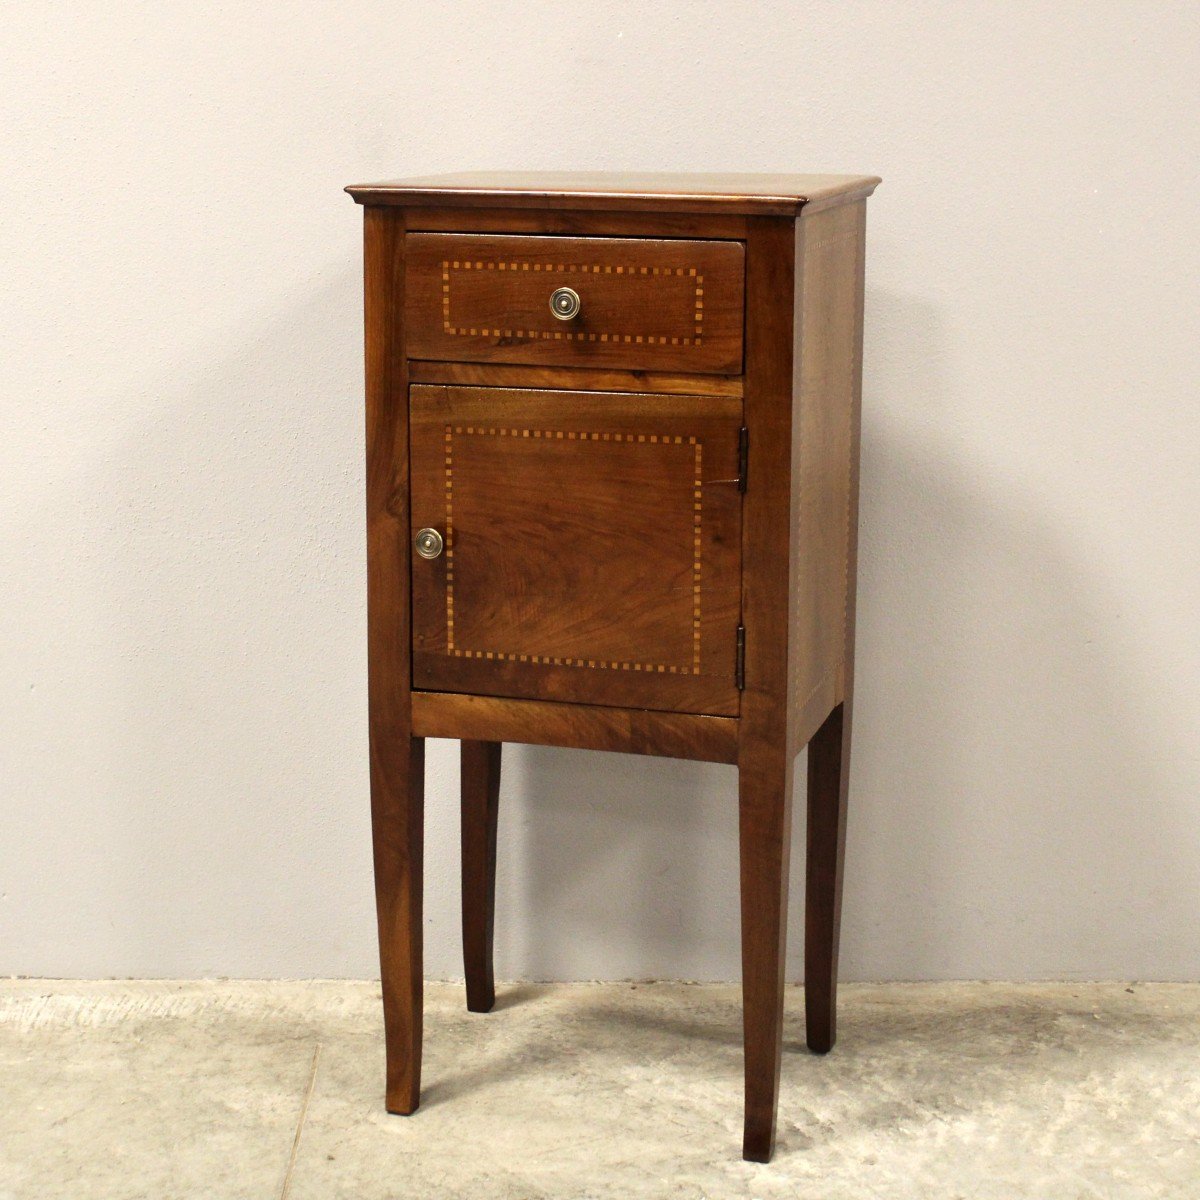 Antique Directoire Bedside Nightstand Table In Walnut And Marquetry - Italy 19th-photo-2